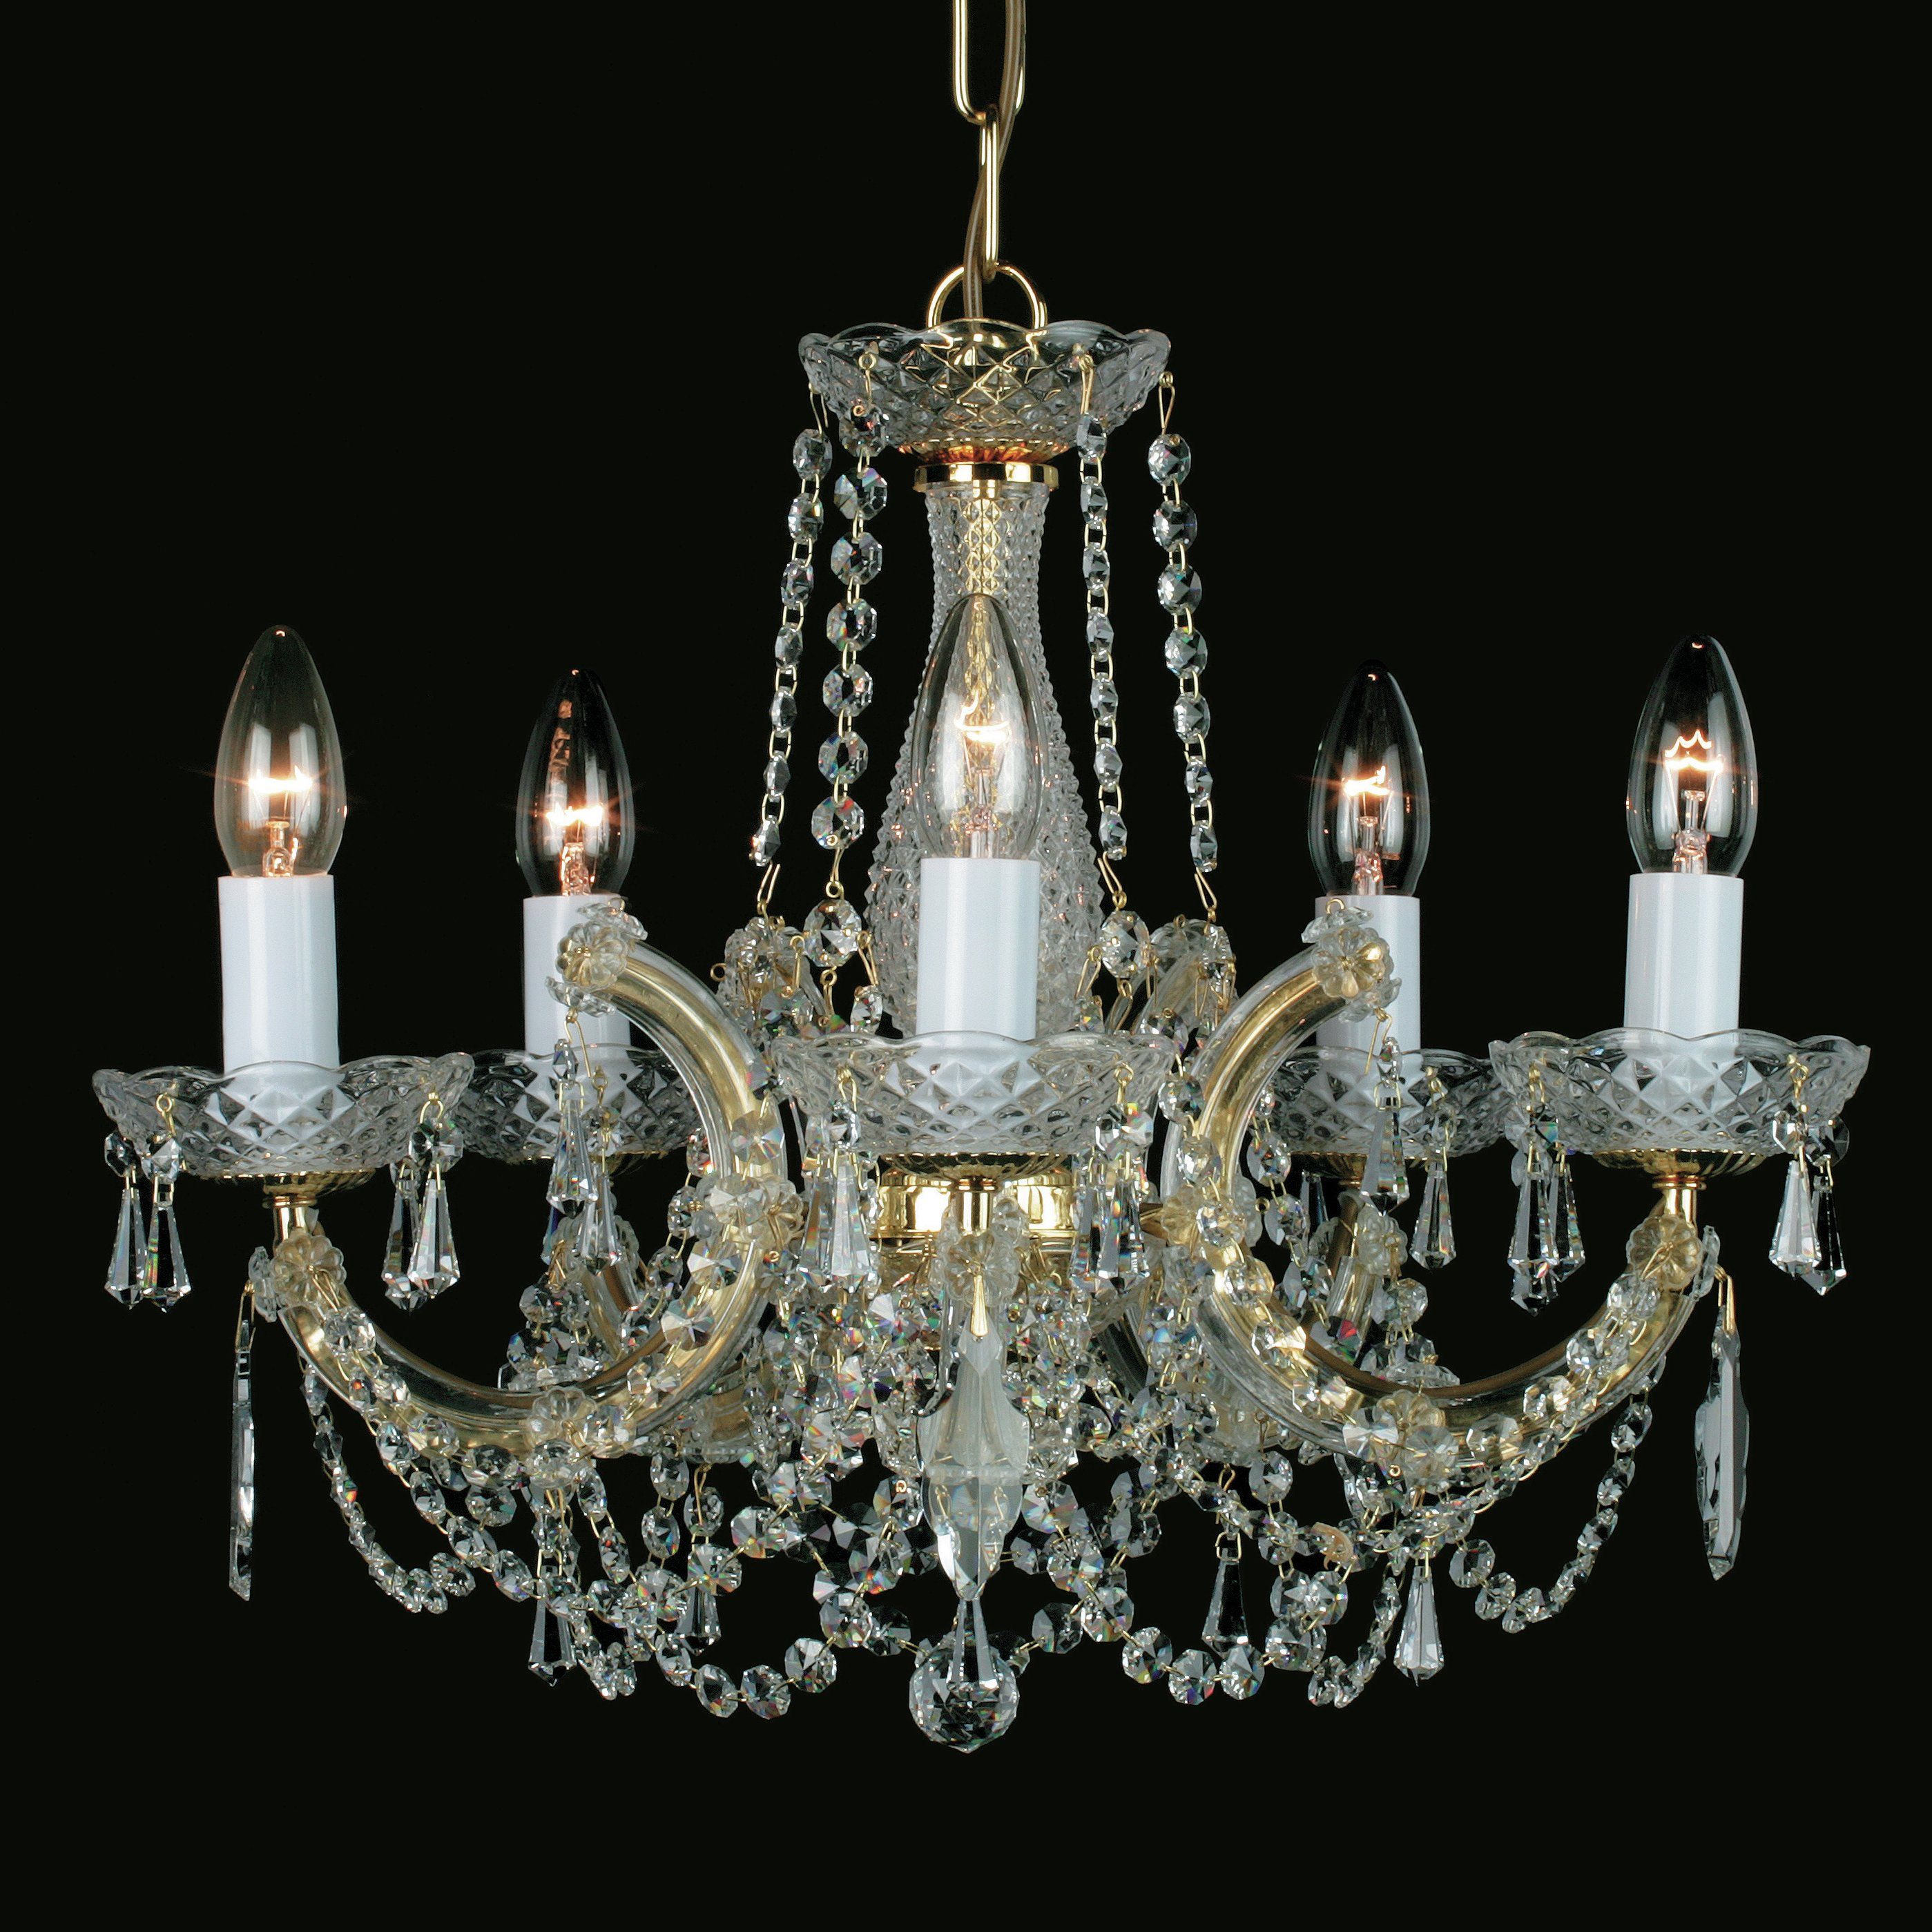 Impex Lighting Marie Theresa 5 Light Candle Style Chandelier For Thresa 5 Light Shaded Chandeliers (View 15 of 30)